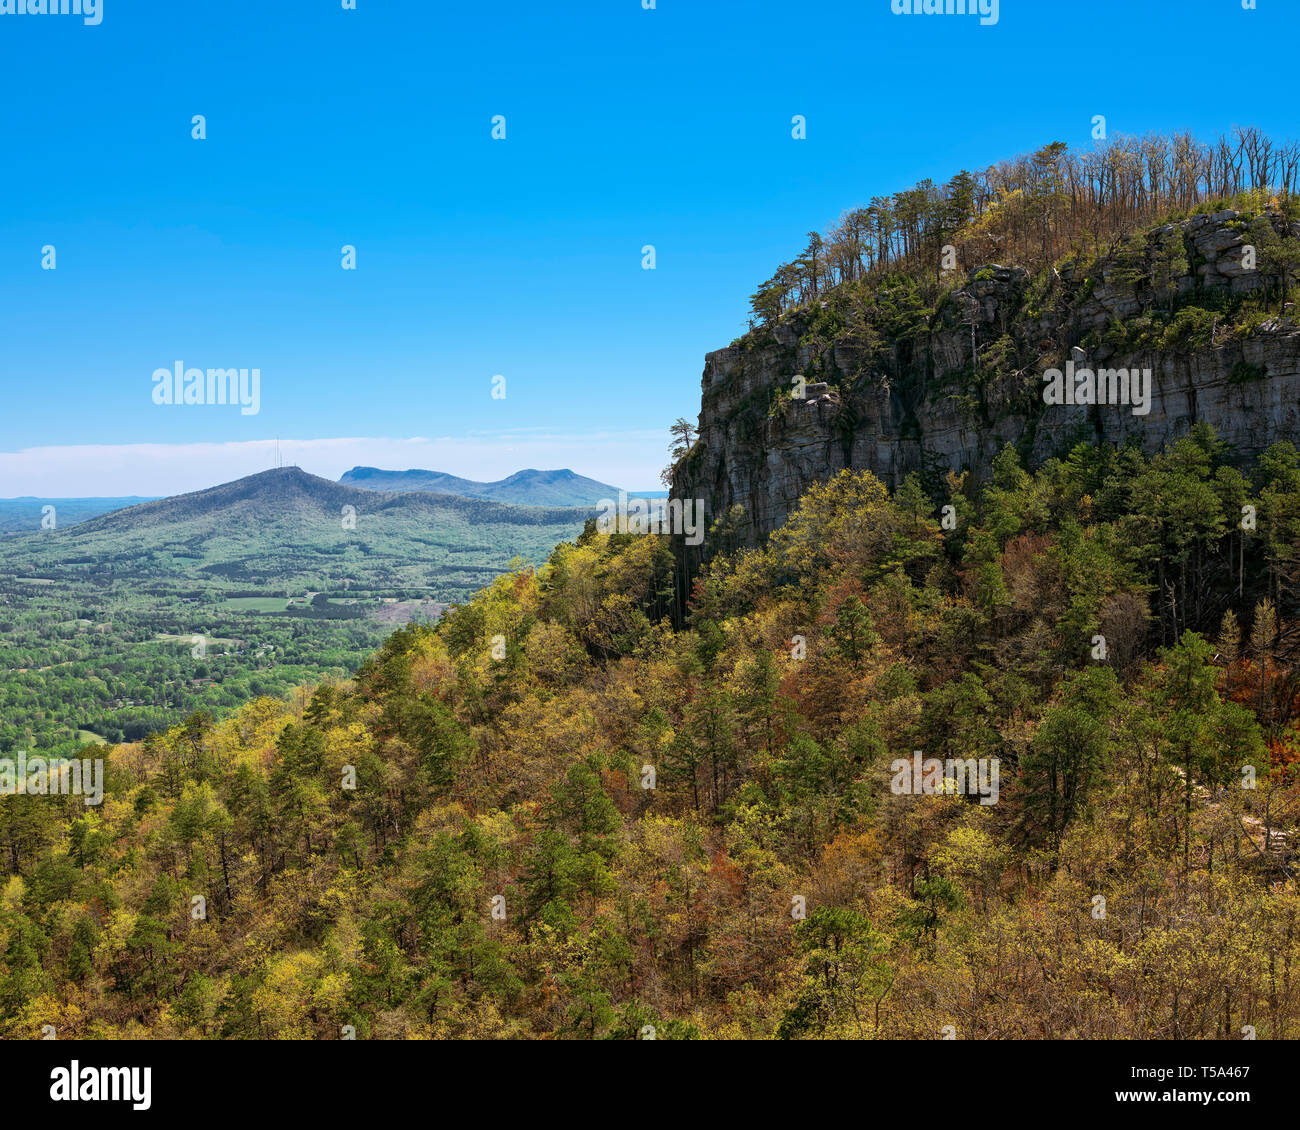 View from the overlook at Pilot Mountain State Park. Big pinnacle. Springtime mountain landscape image. Stock Photo